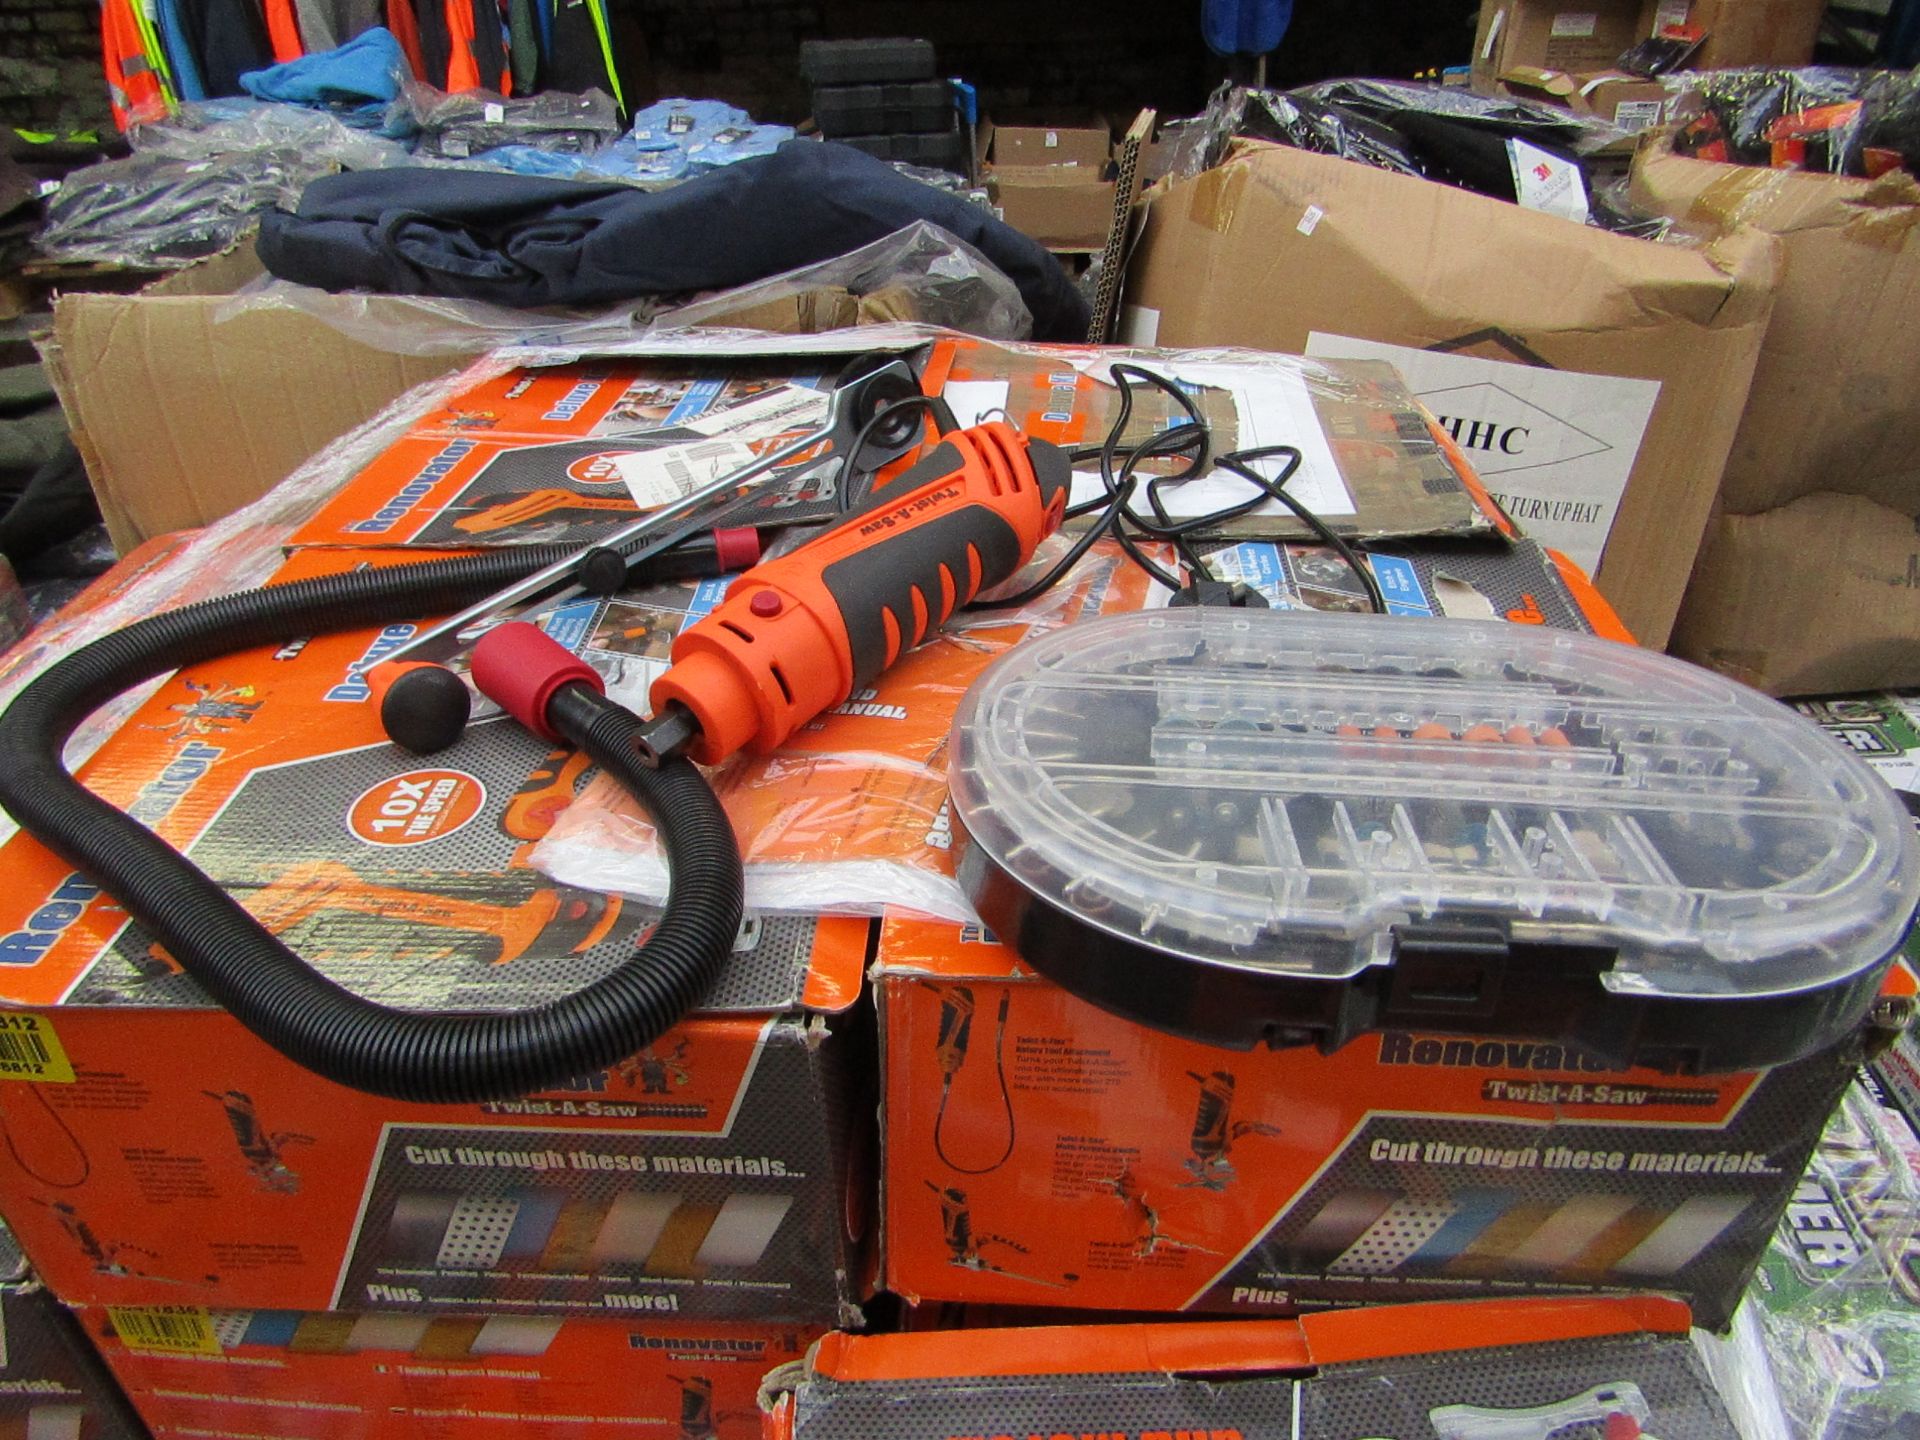 The Renovator Twist-a-Saw Deluxe Kit, Tested working and boxed (we havent checked all parts are